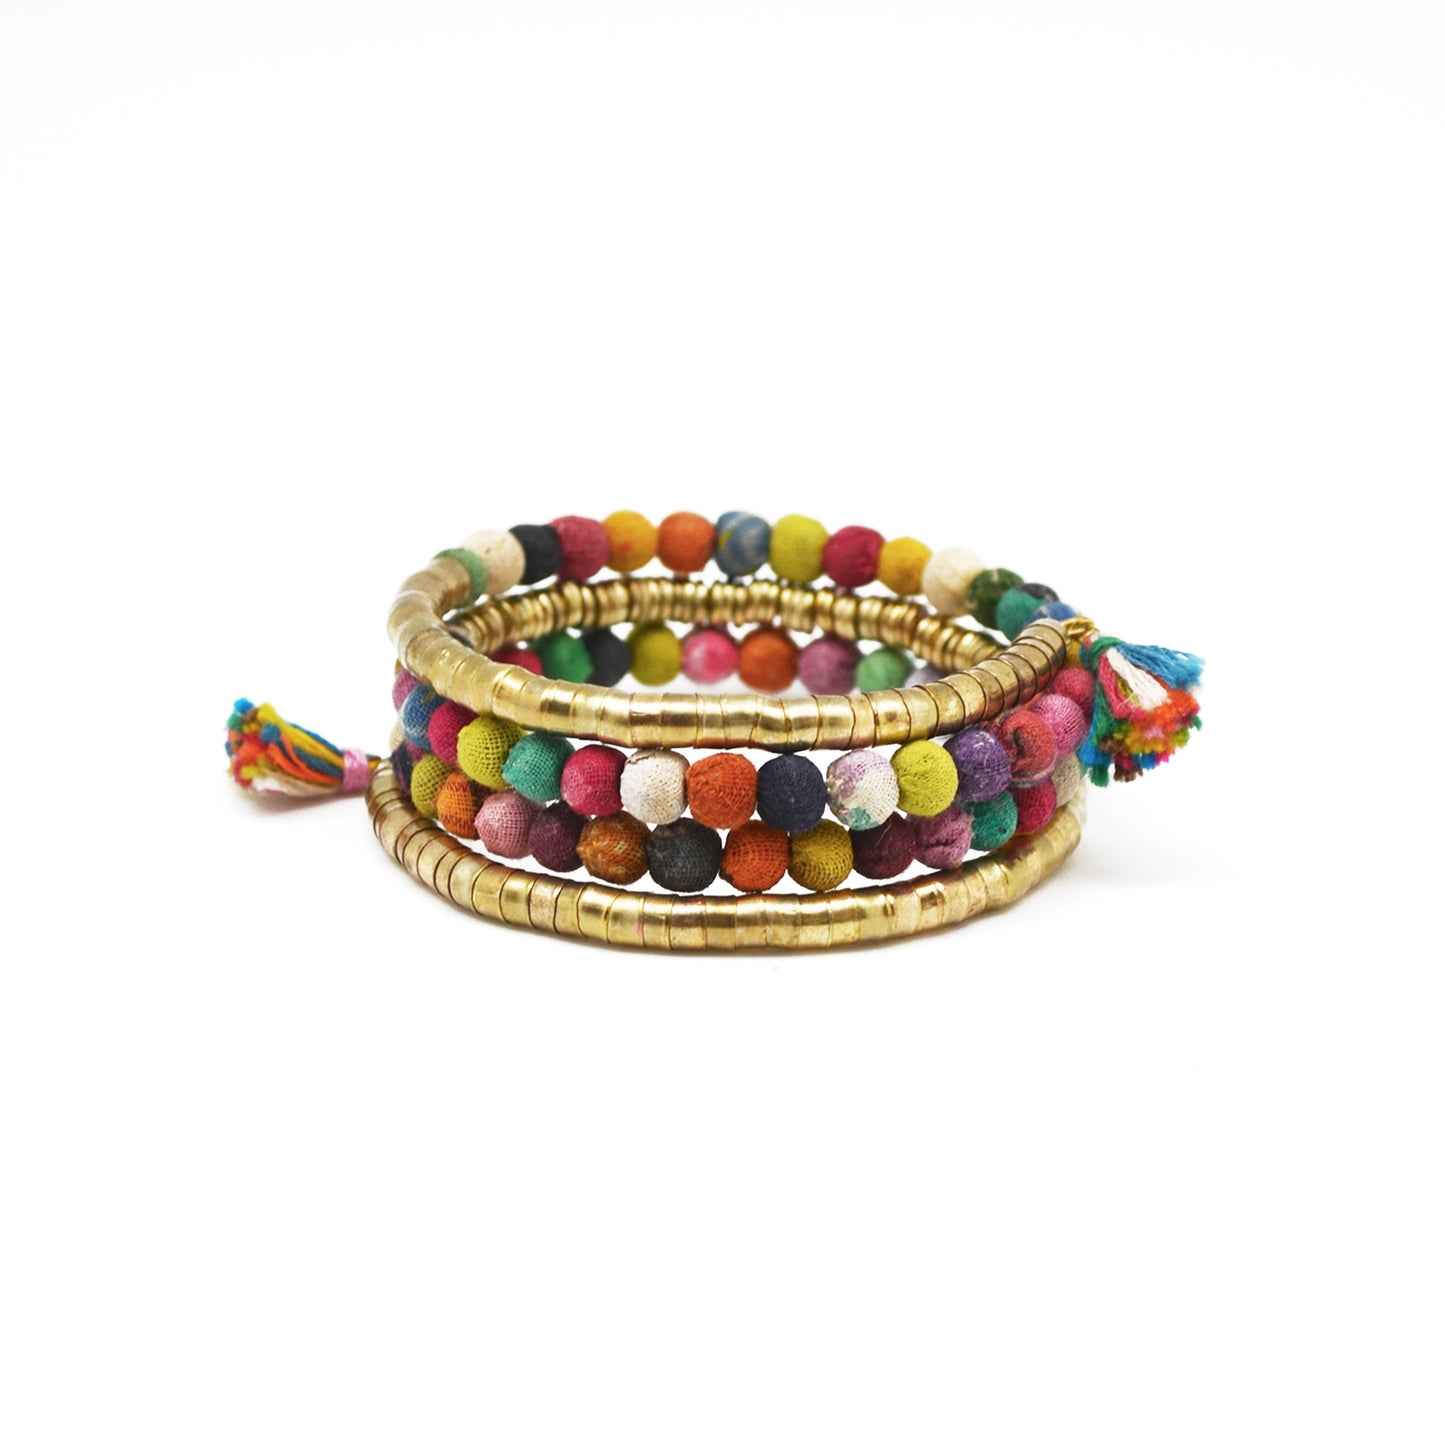 Beaded Wrap Bracelet with Tassels (Recycled Saris!)